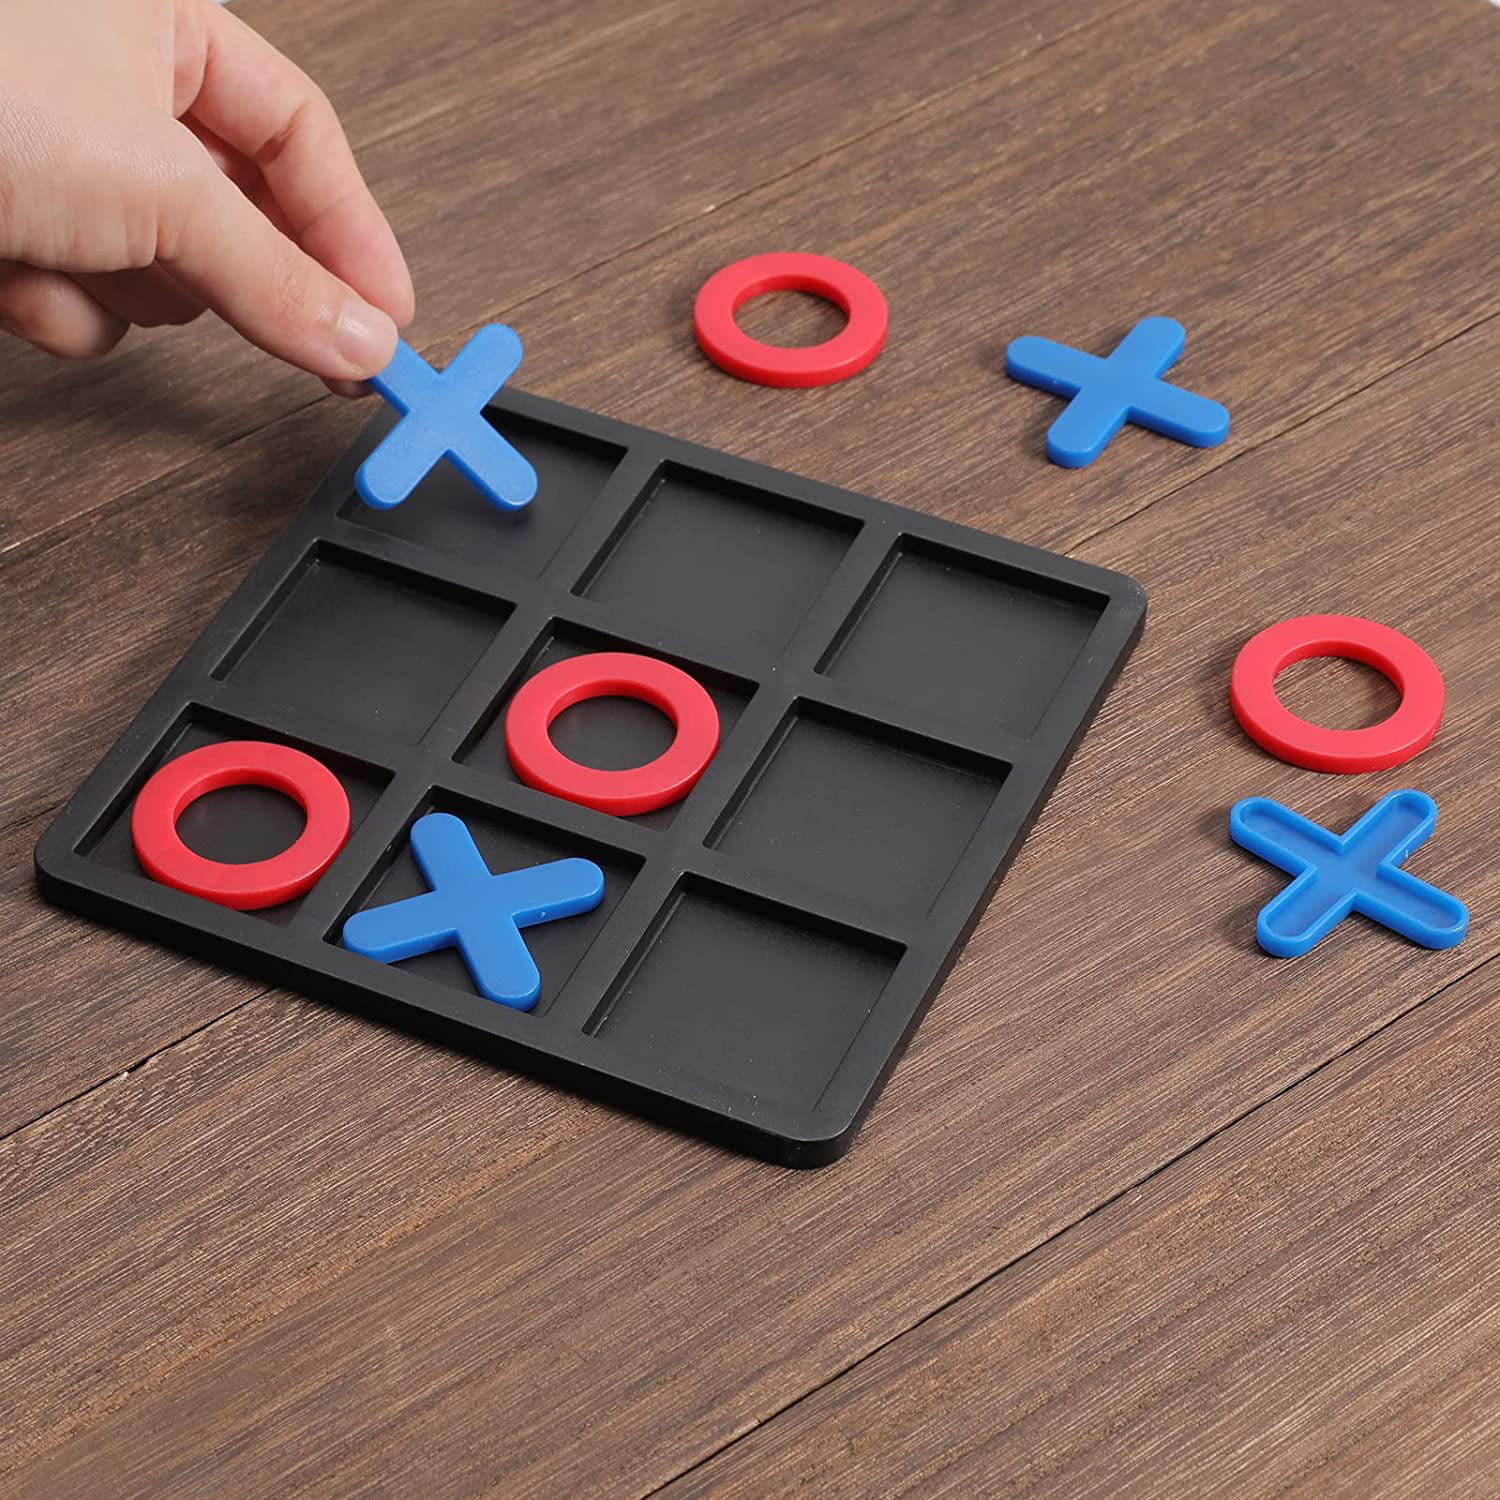 Tic Tac Toe Board Game ,Tic Tac Toe Family Game, Classic Board Game,  Classical Family Board Game,Children's Tic Tac Toe Game, Early Learning  Puzzle